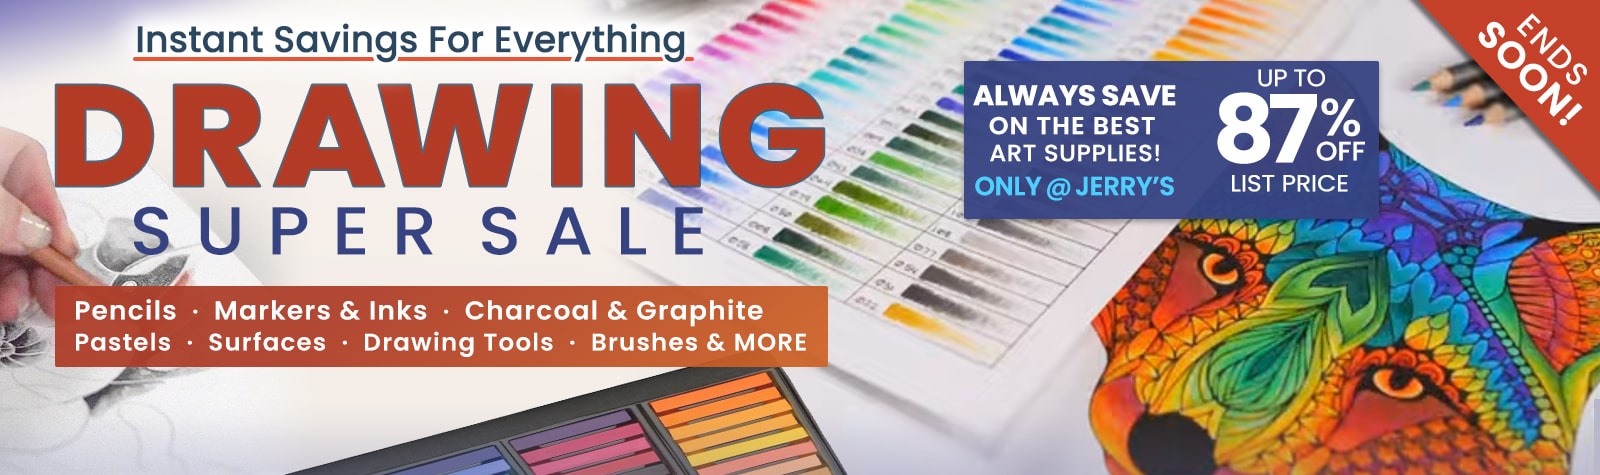 Instant Savings for Everything Drawing Super Sale